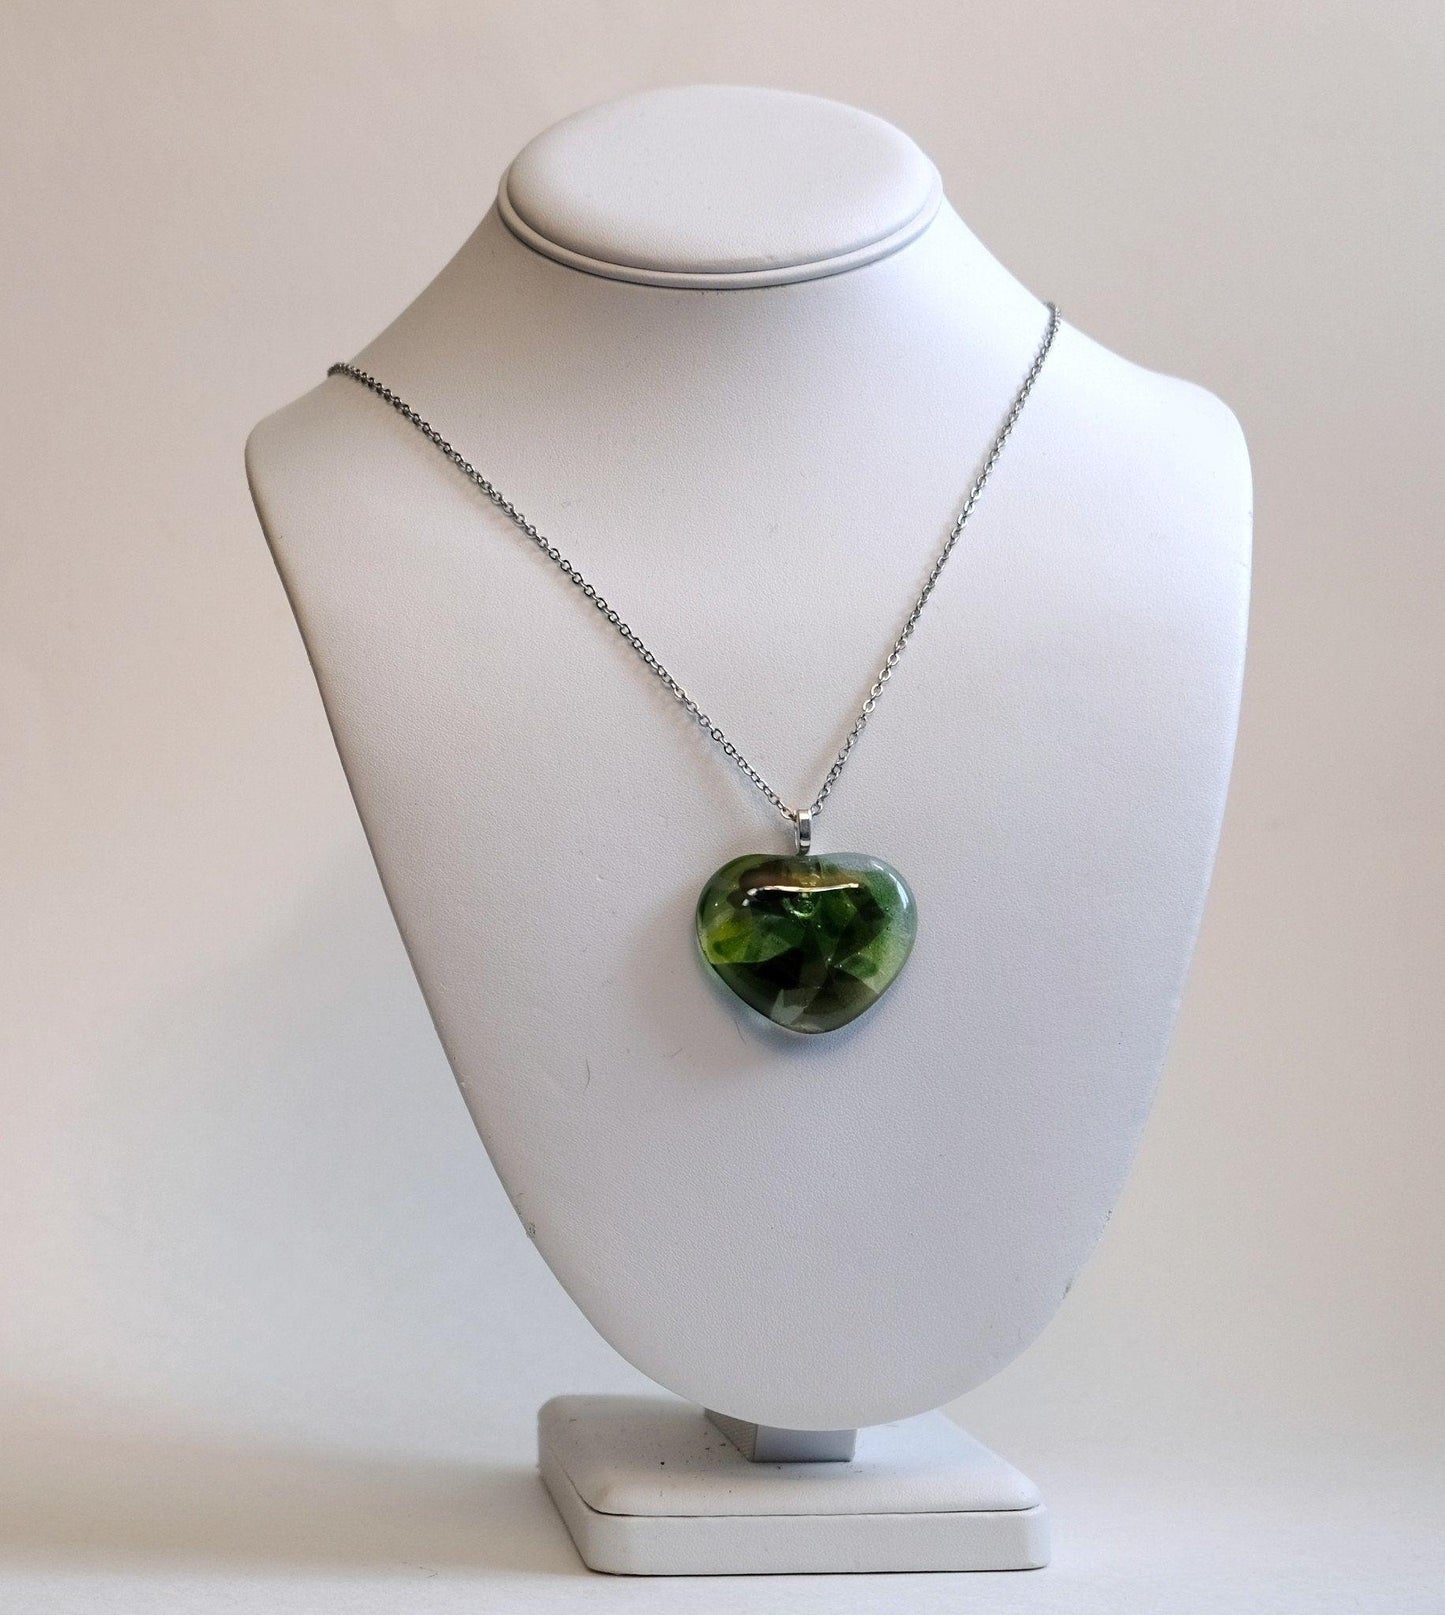 Shades of Green fused Glass Heart Pendant necklace on 18 inch stainless steel chain